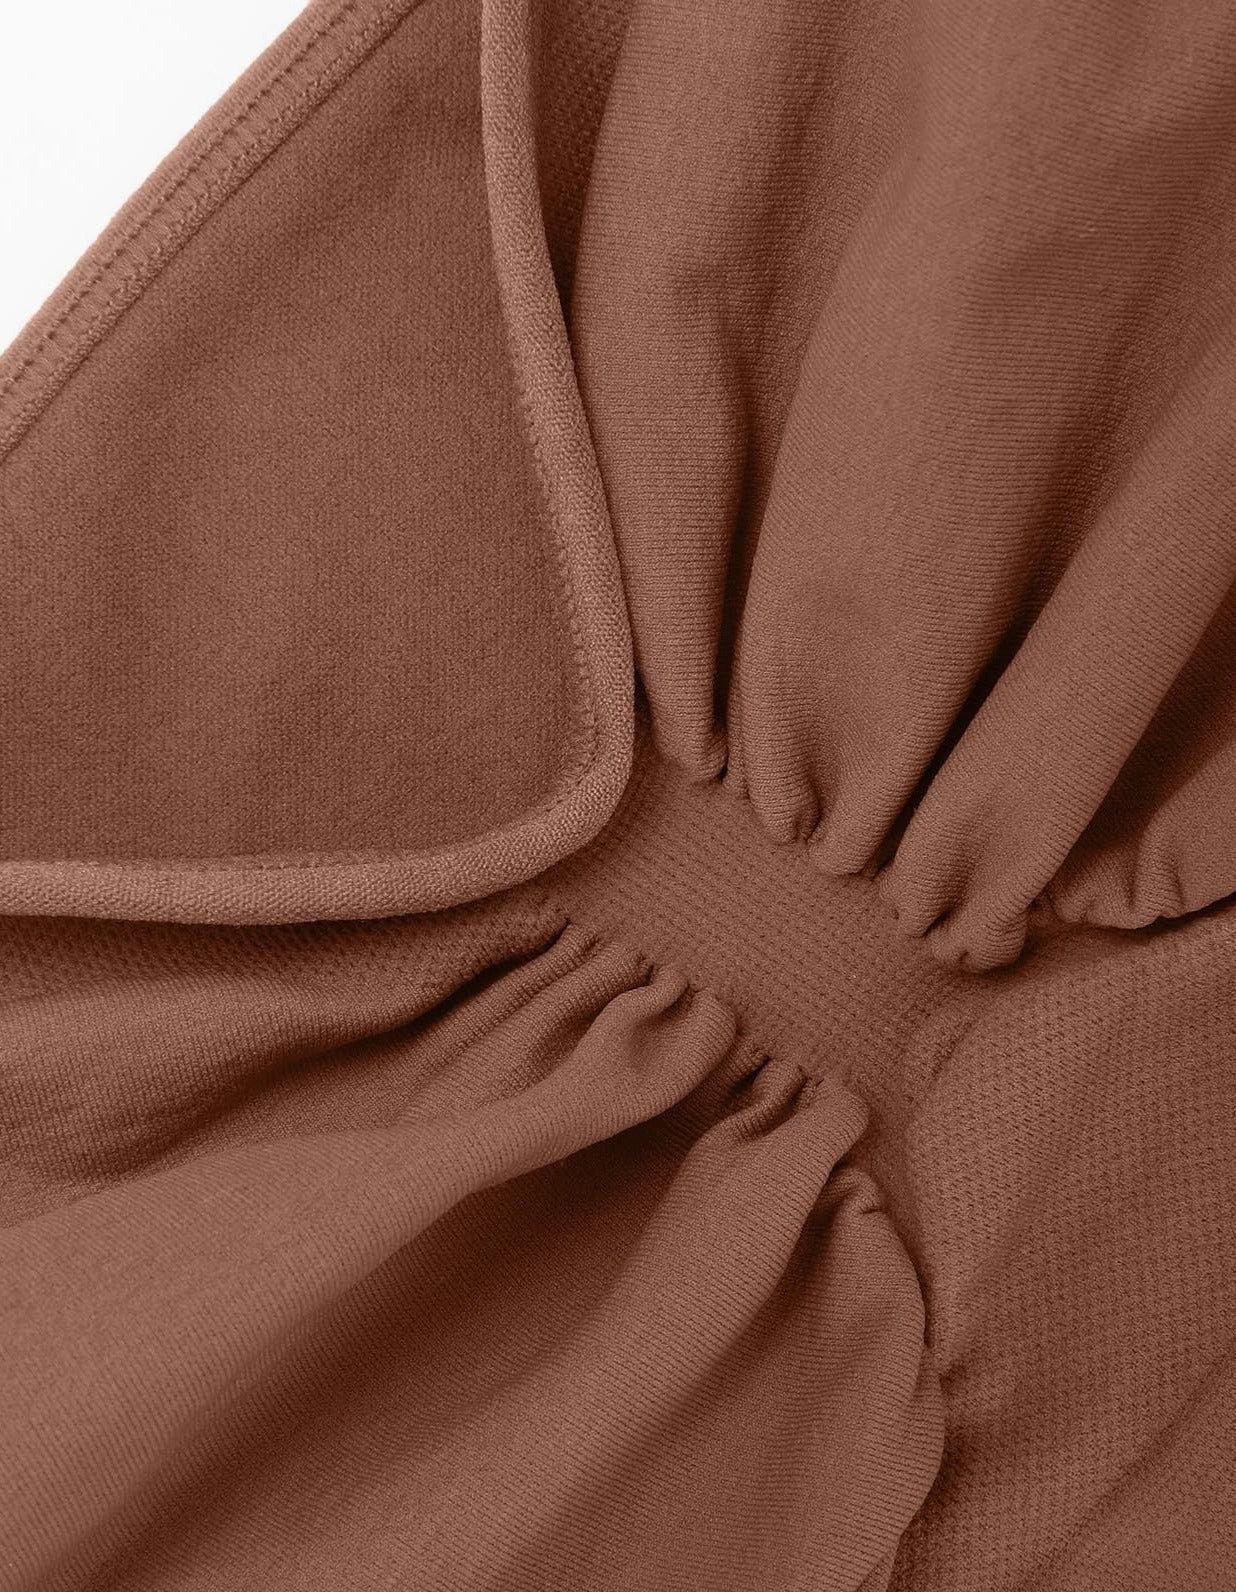 a close up of the back of a brown shirt